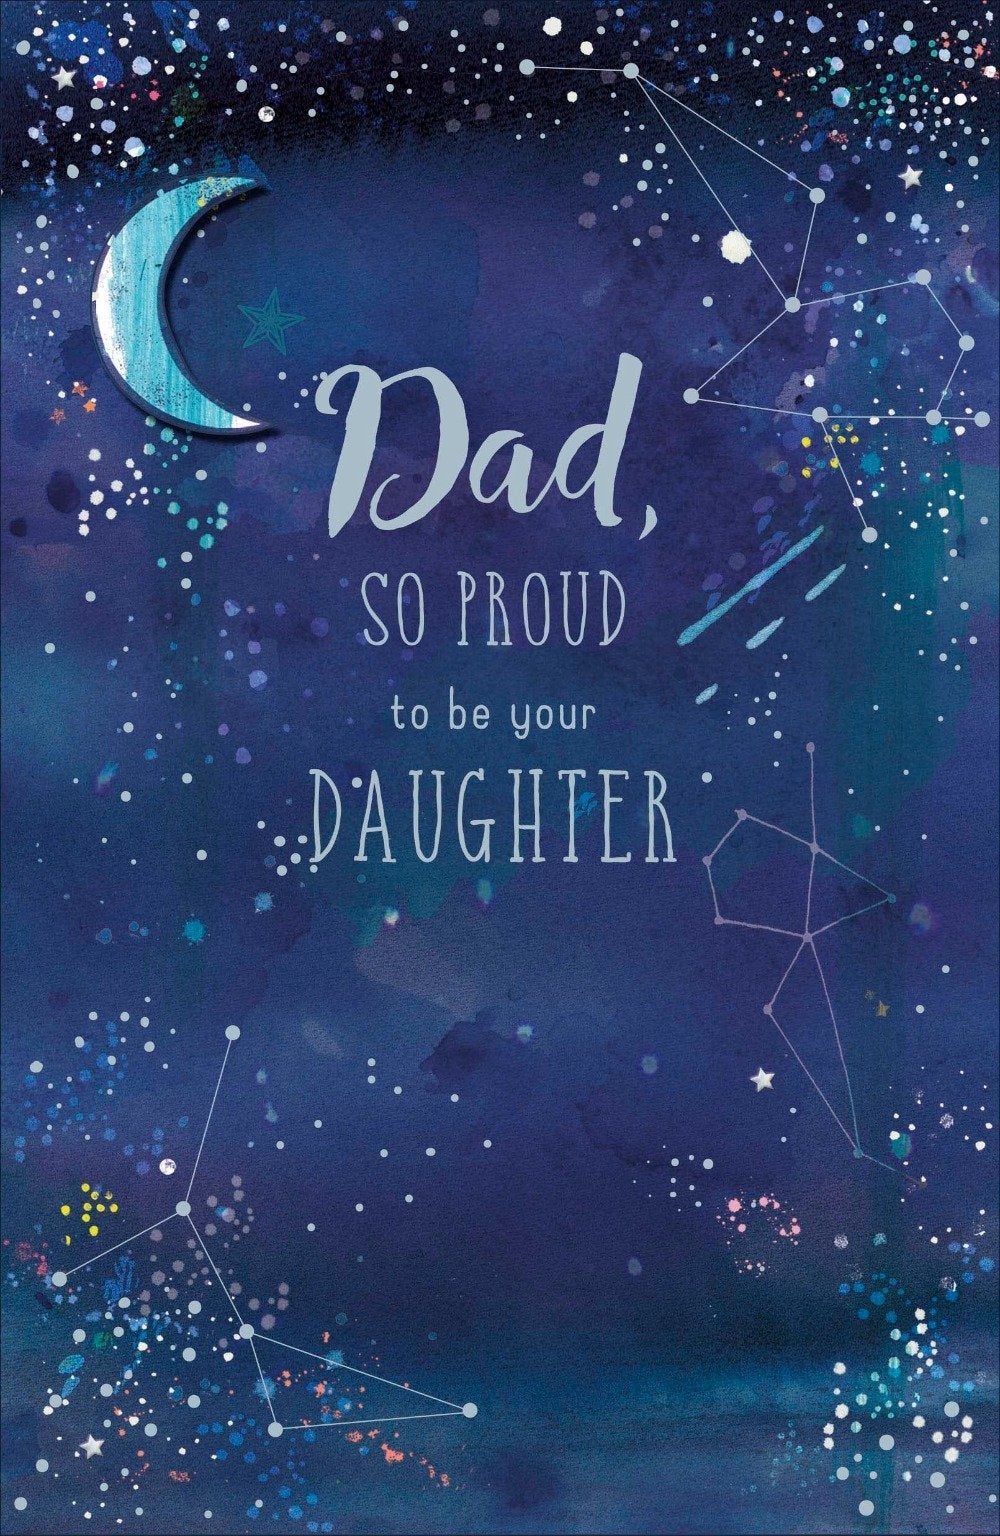 Fathers Day Card - Dad From Daughter / Moon Up The Sky